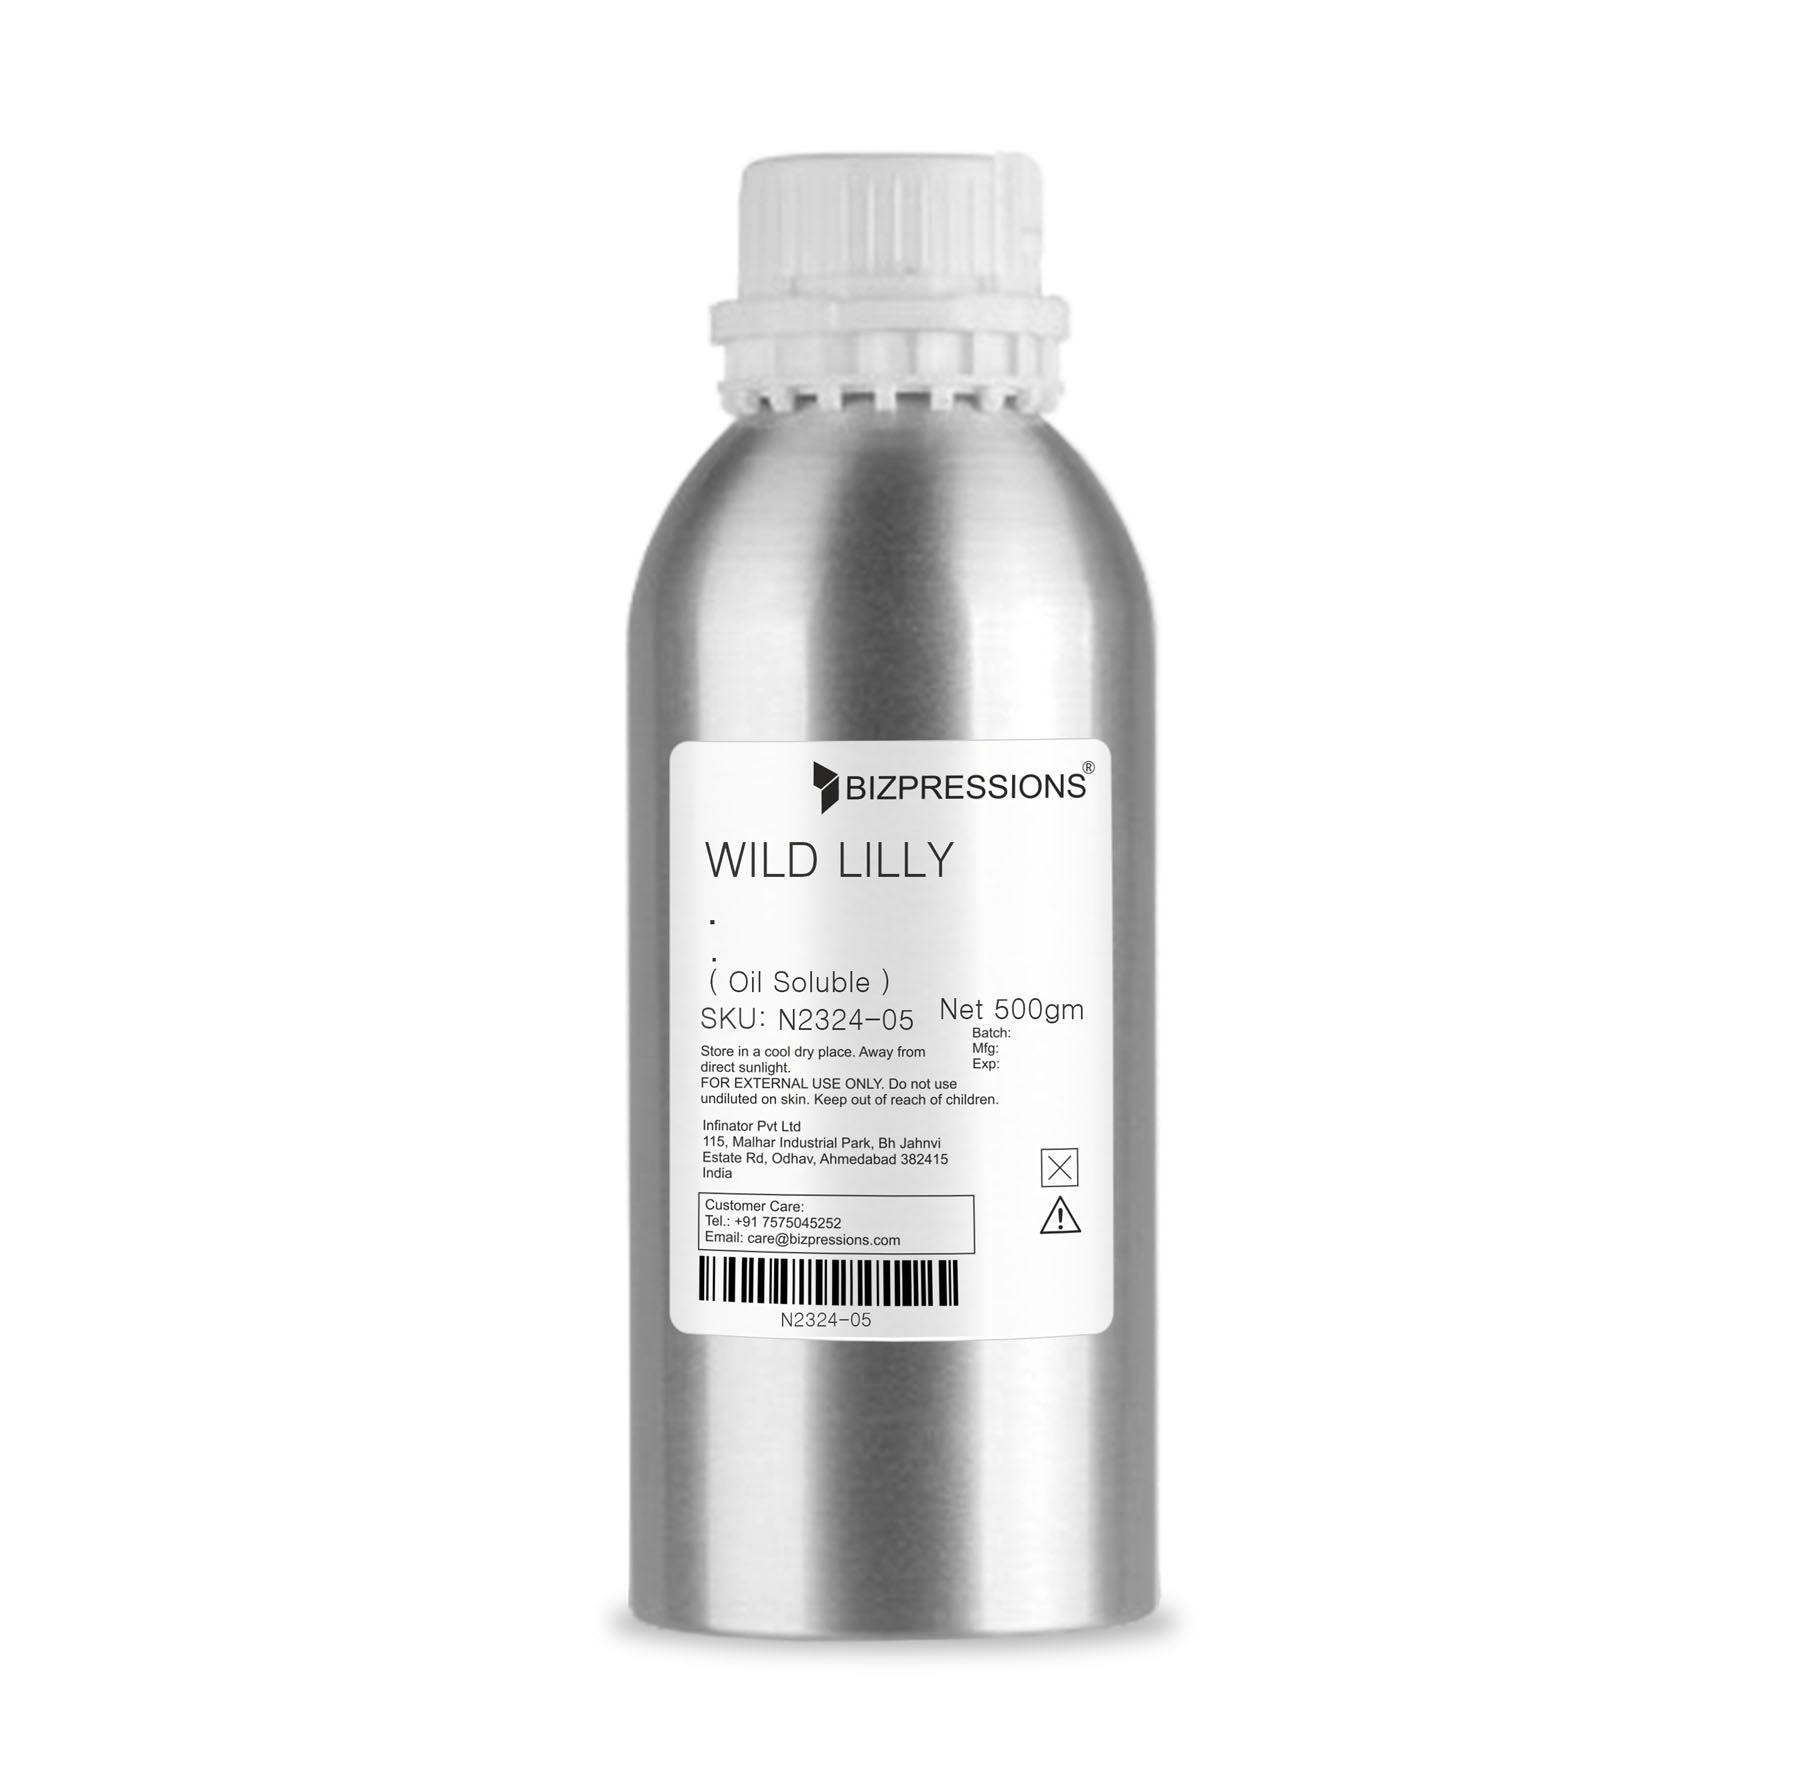 WILD LILLY - Fragrance ( Oil Soluble ) - 500 gm